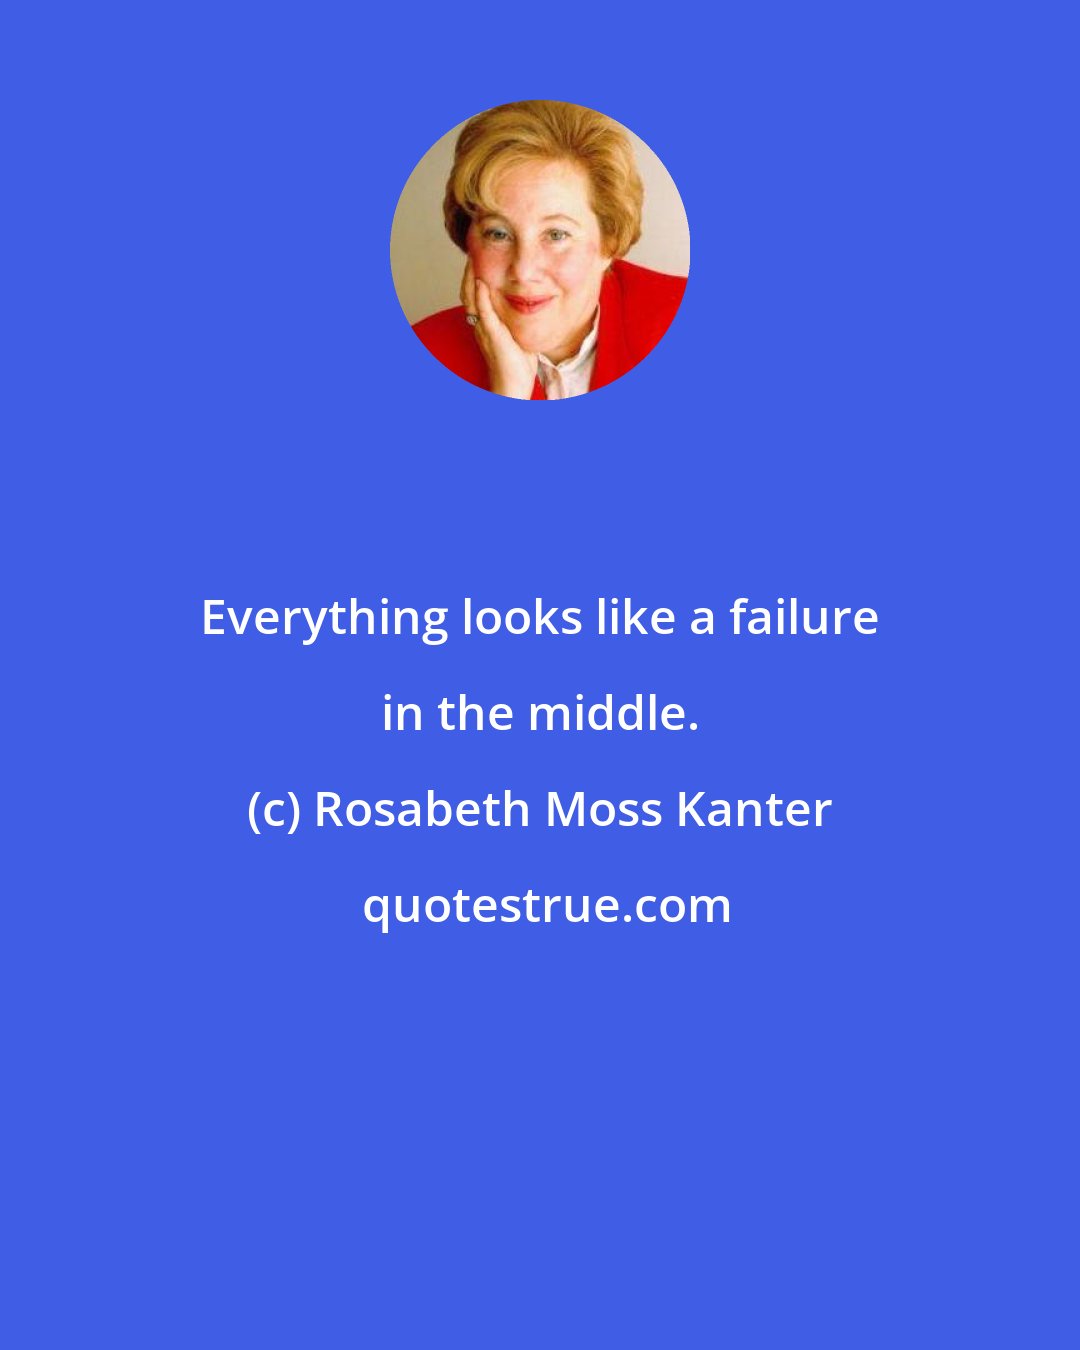 Rosabeth Moss Kanter: Everything looks like a failure in the middle.